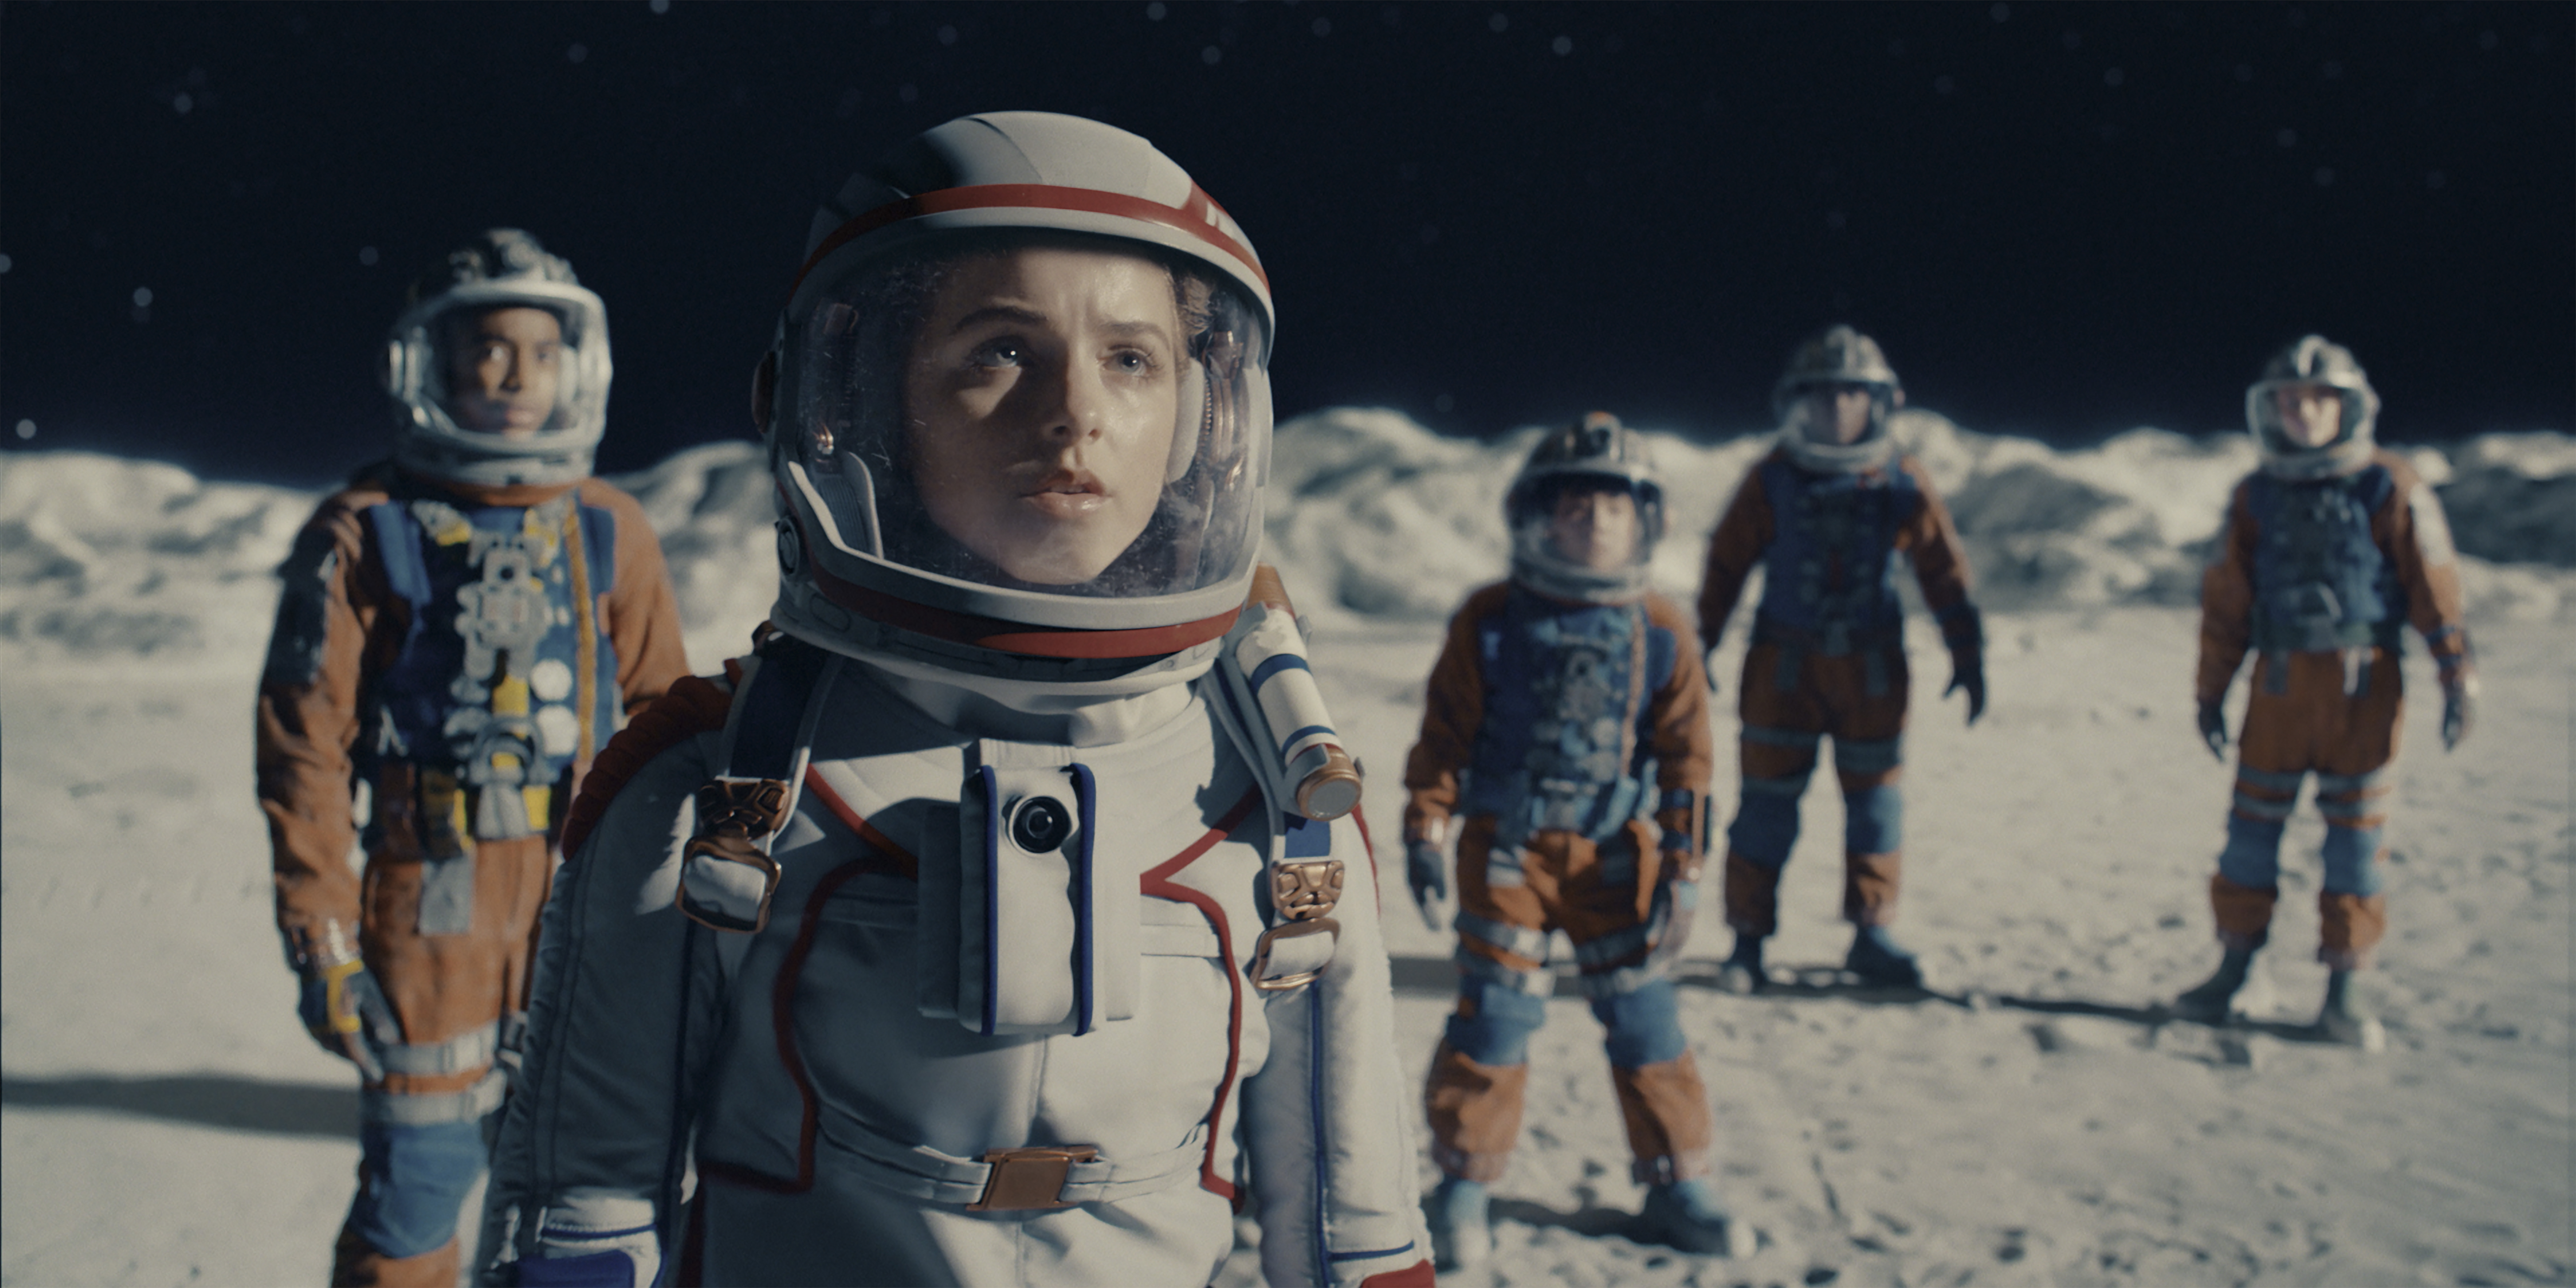 Addison, Caleb, Borney, Marcus, and Dylan on the moon